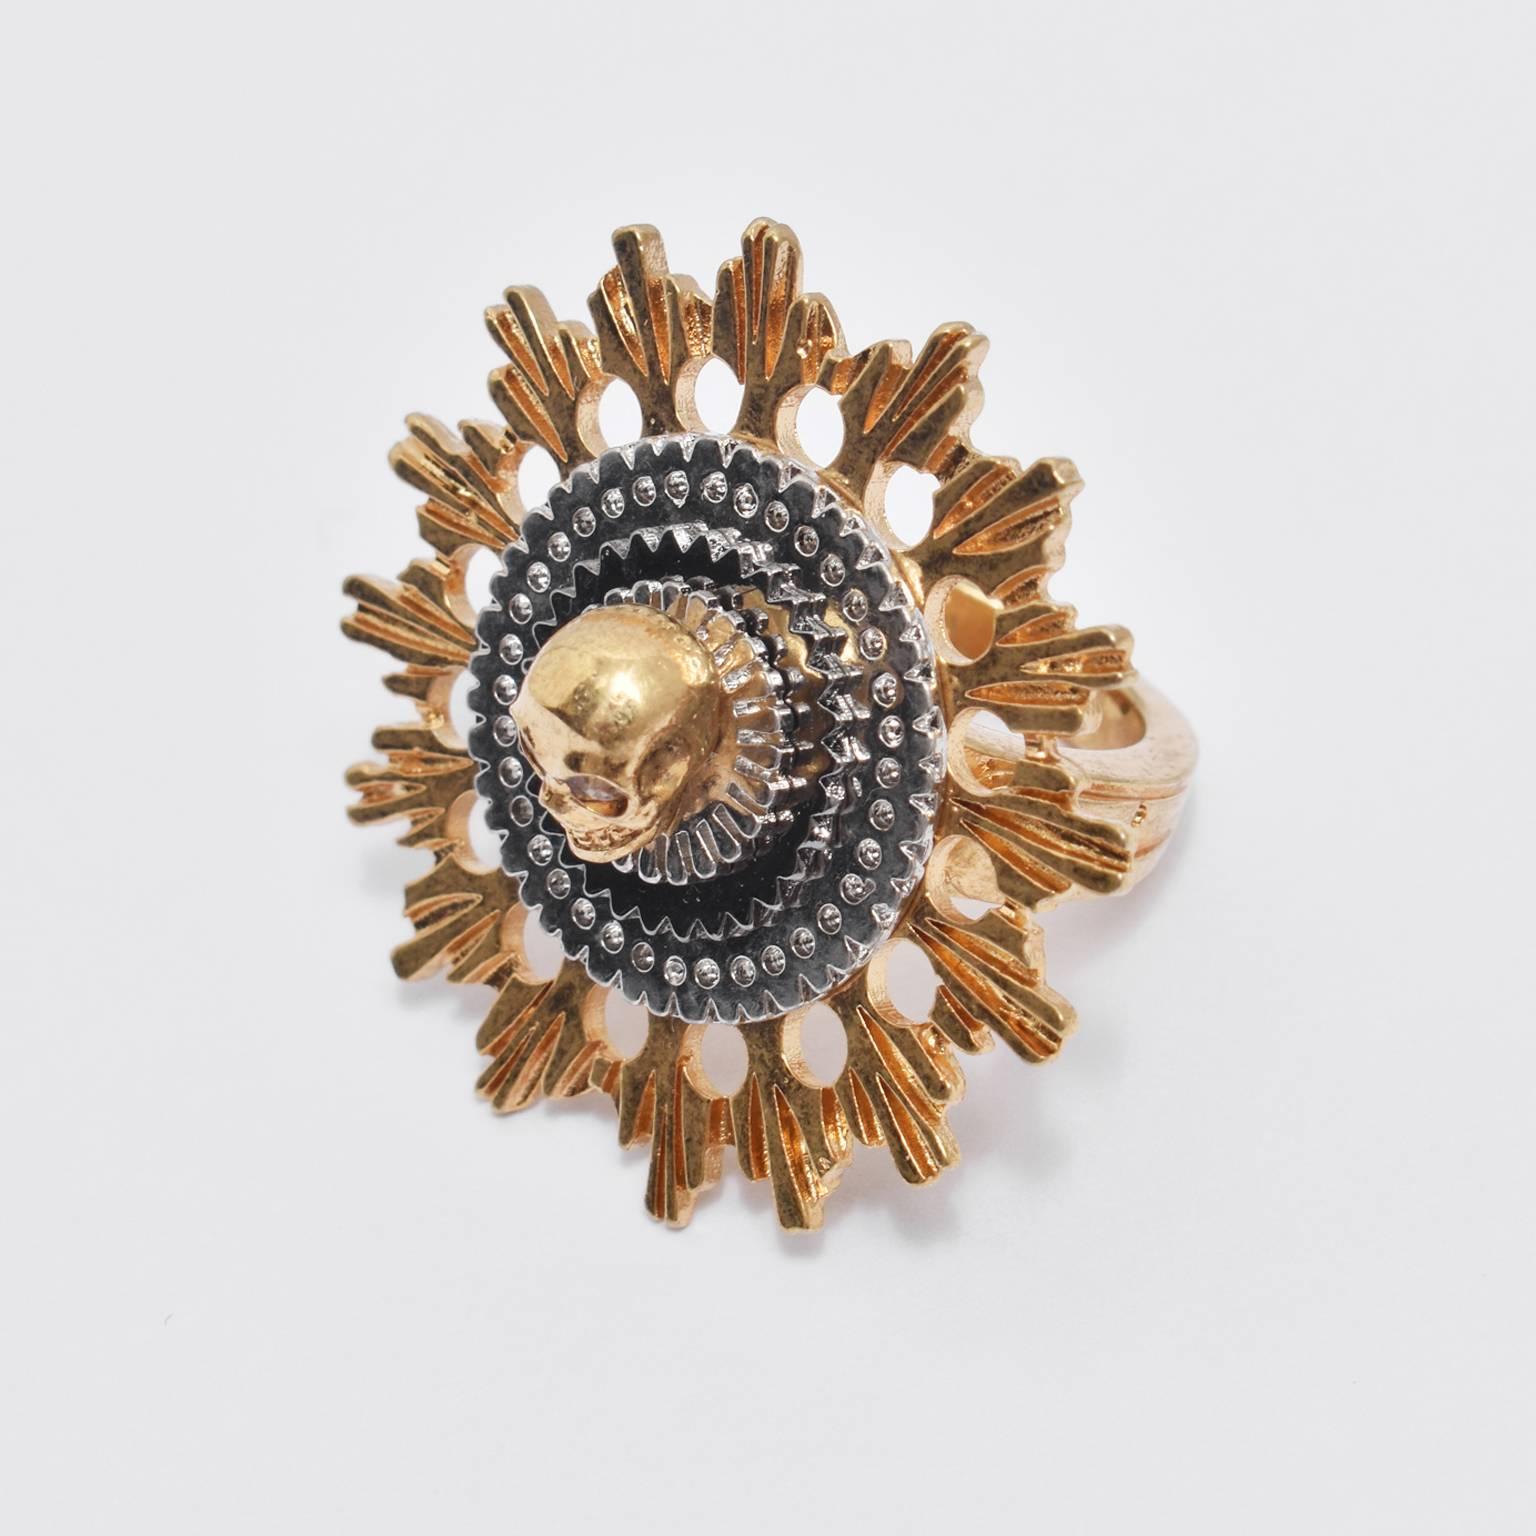 A stunning gold plated ring from Alexander McQueen. The ring features McQueen’s signature 3D skull design in a contrast silver roundel with a gold abstract, mechanical sunburst around the outside. The circular shape is attached to a thick gold band.